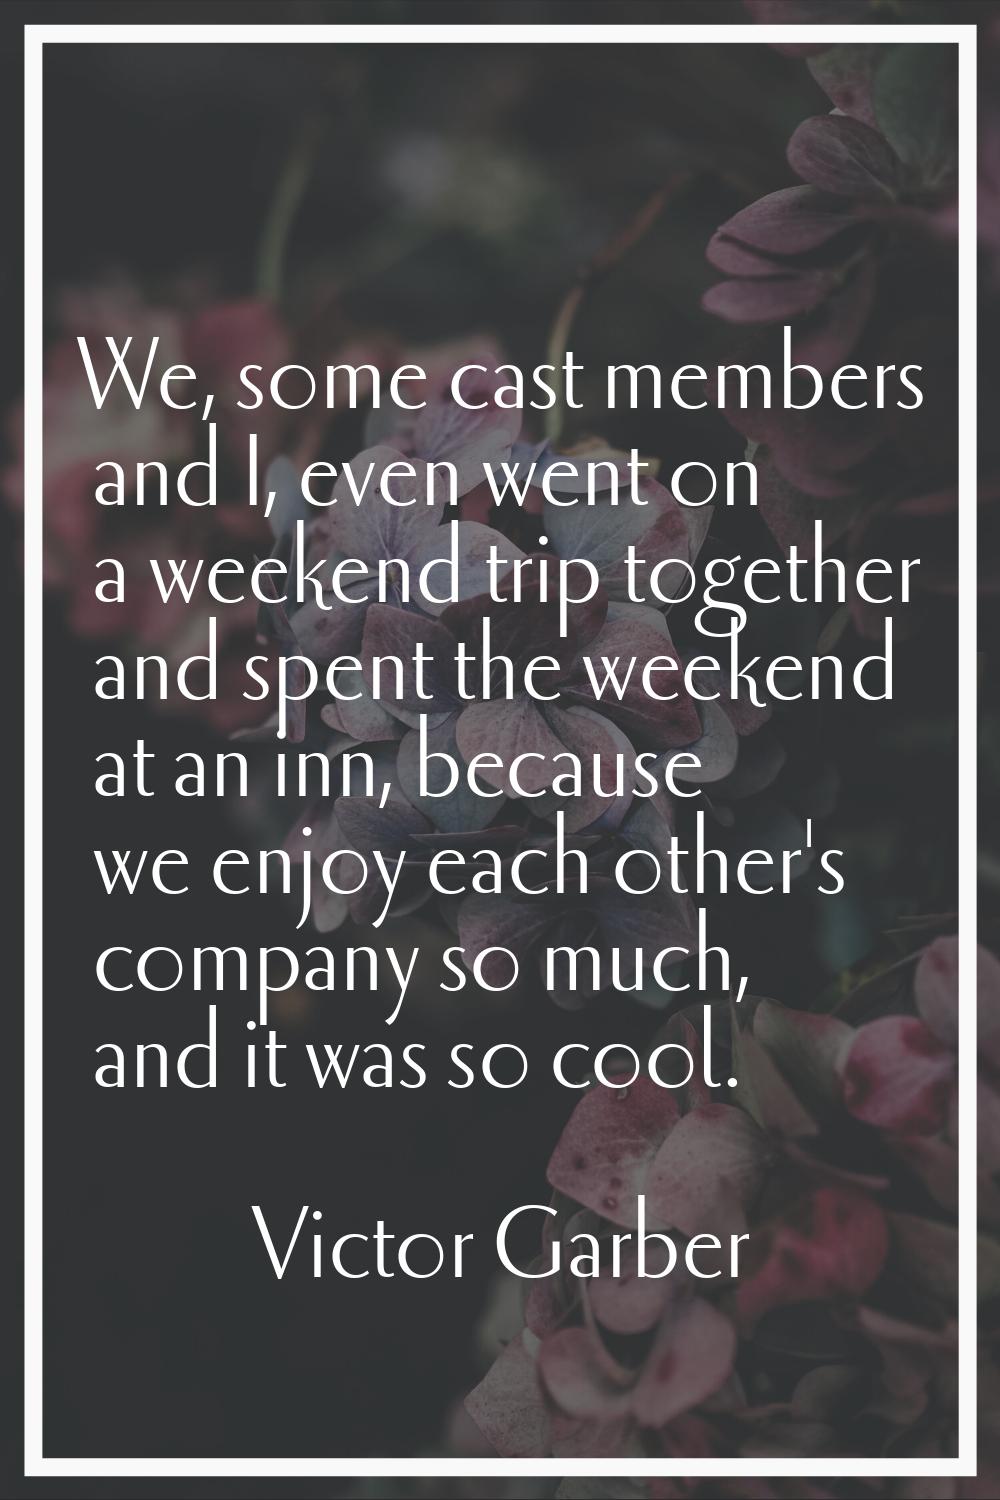 We, some cast members and I, even went on a weekend trip together and spent the weekend at an inn, 